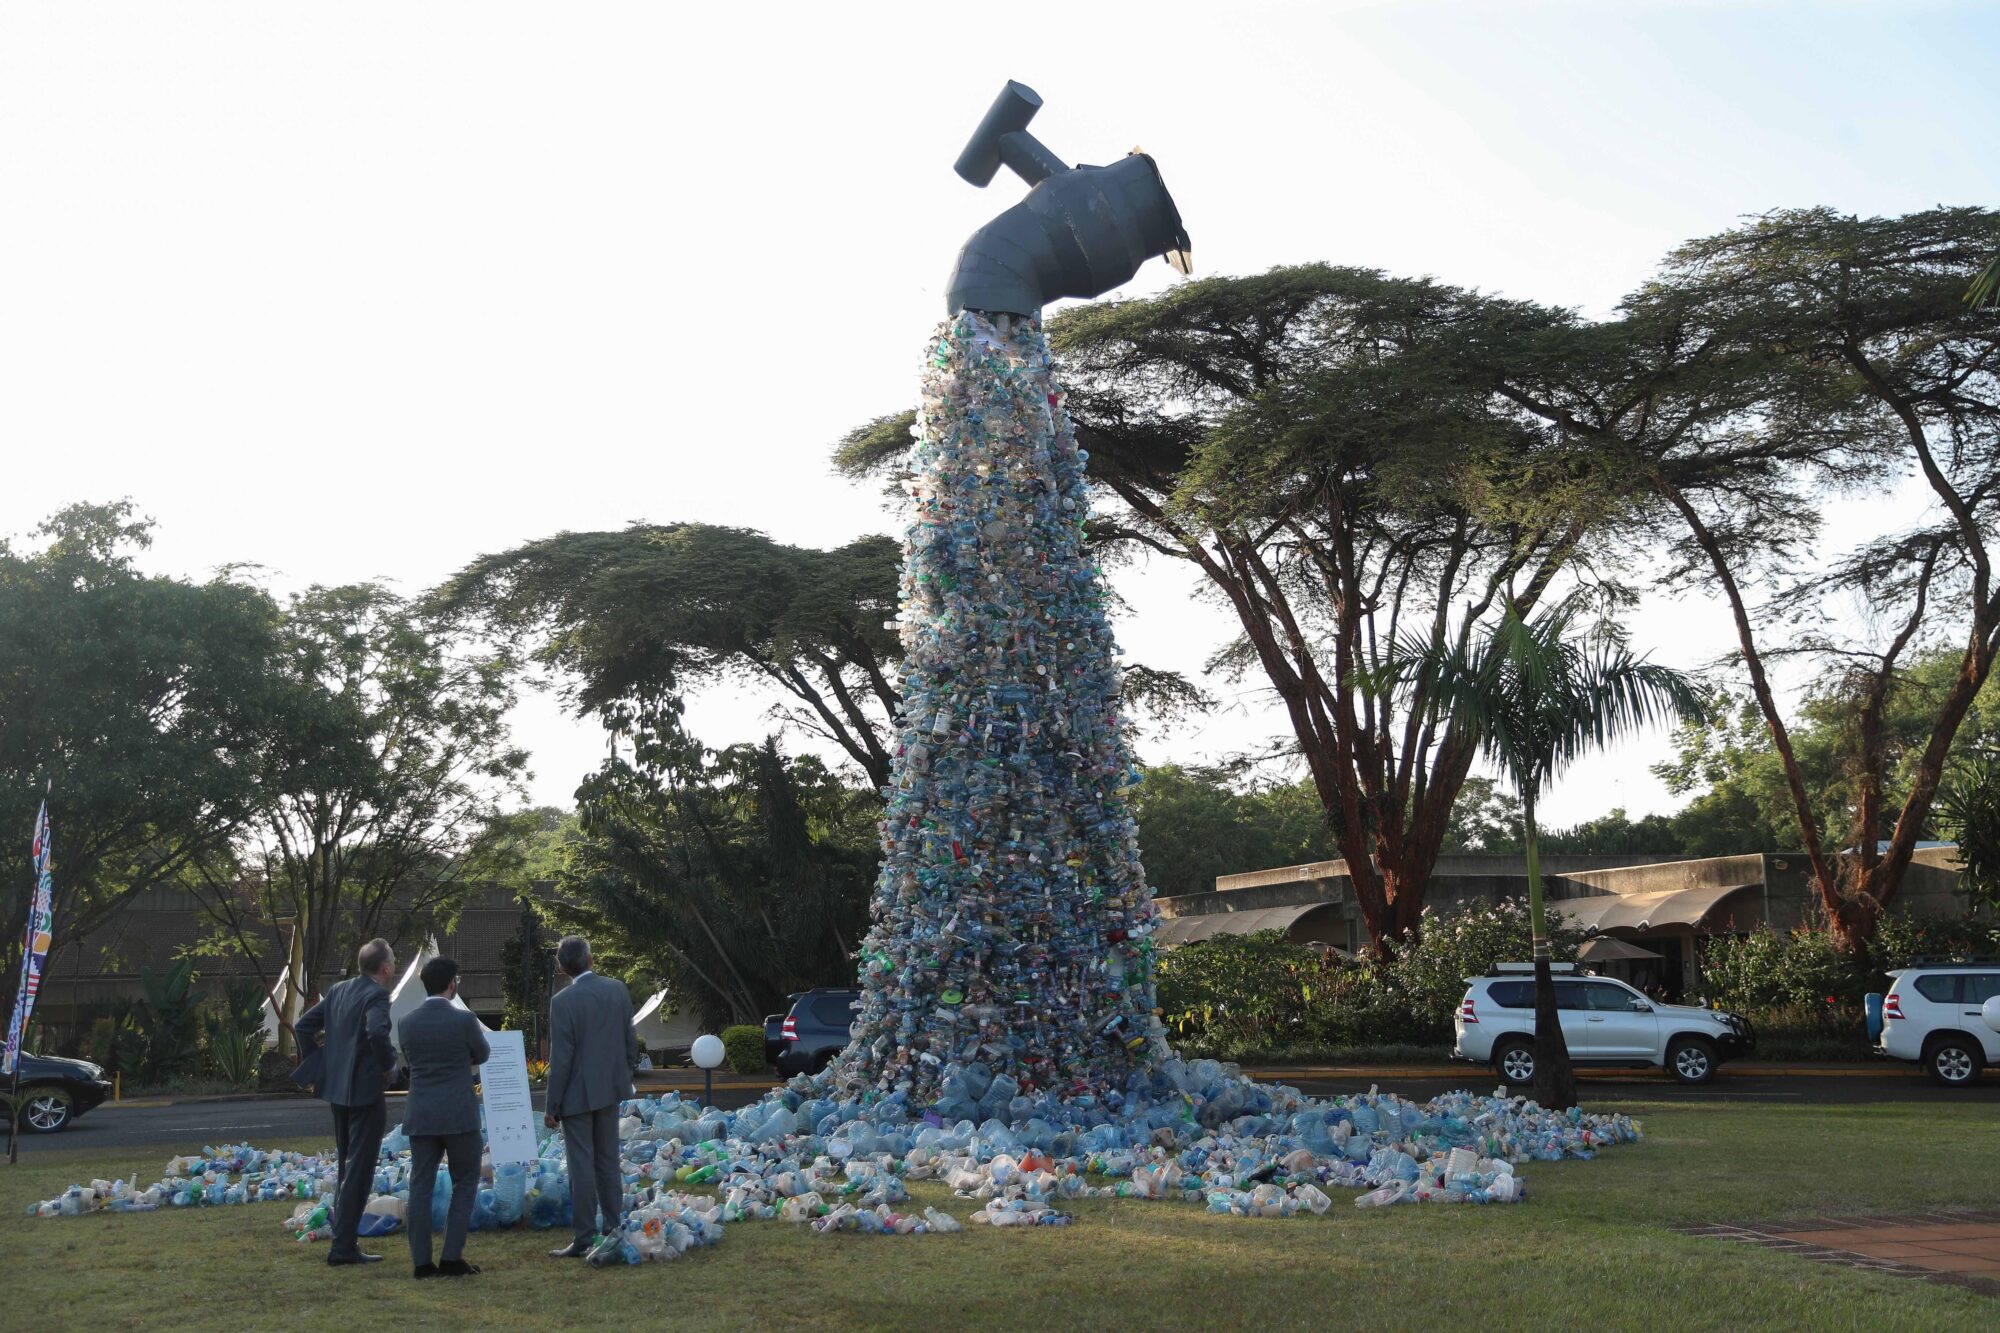 Art installation depicting plastic bottles flowing from a tap